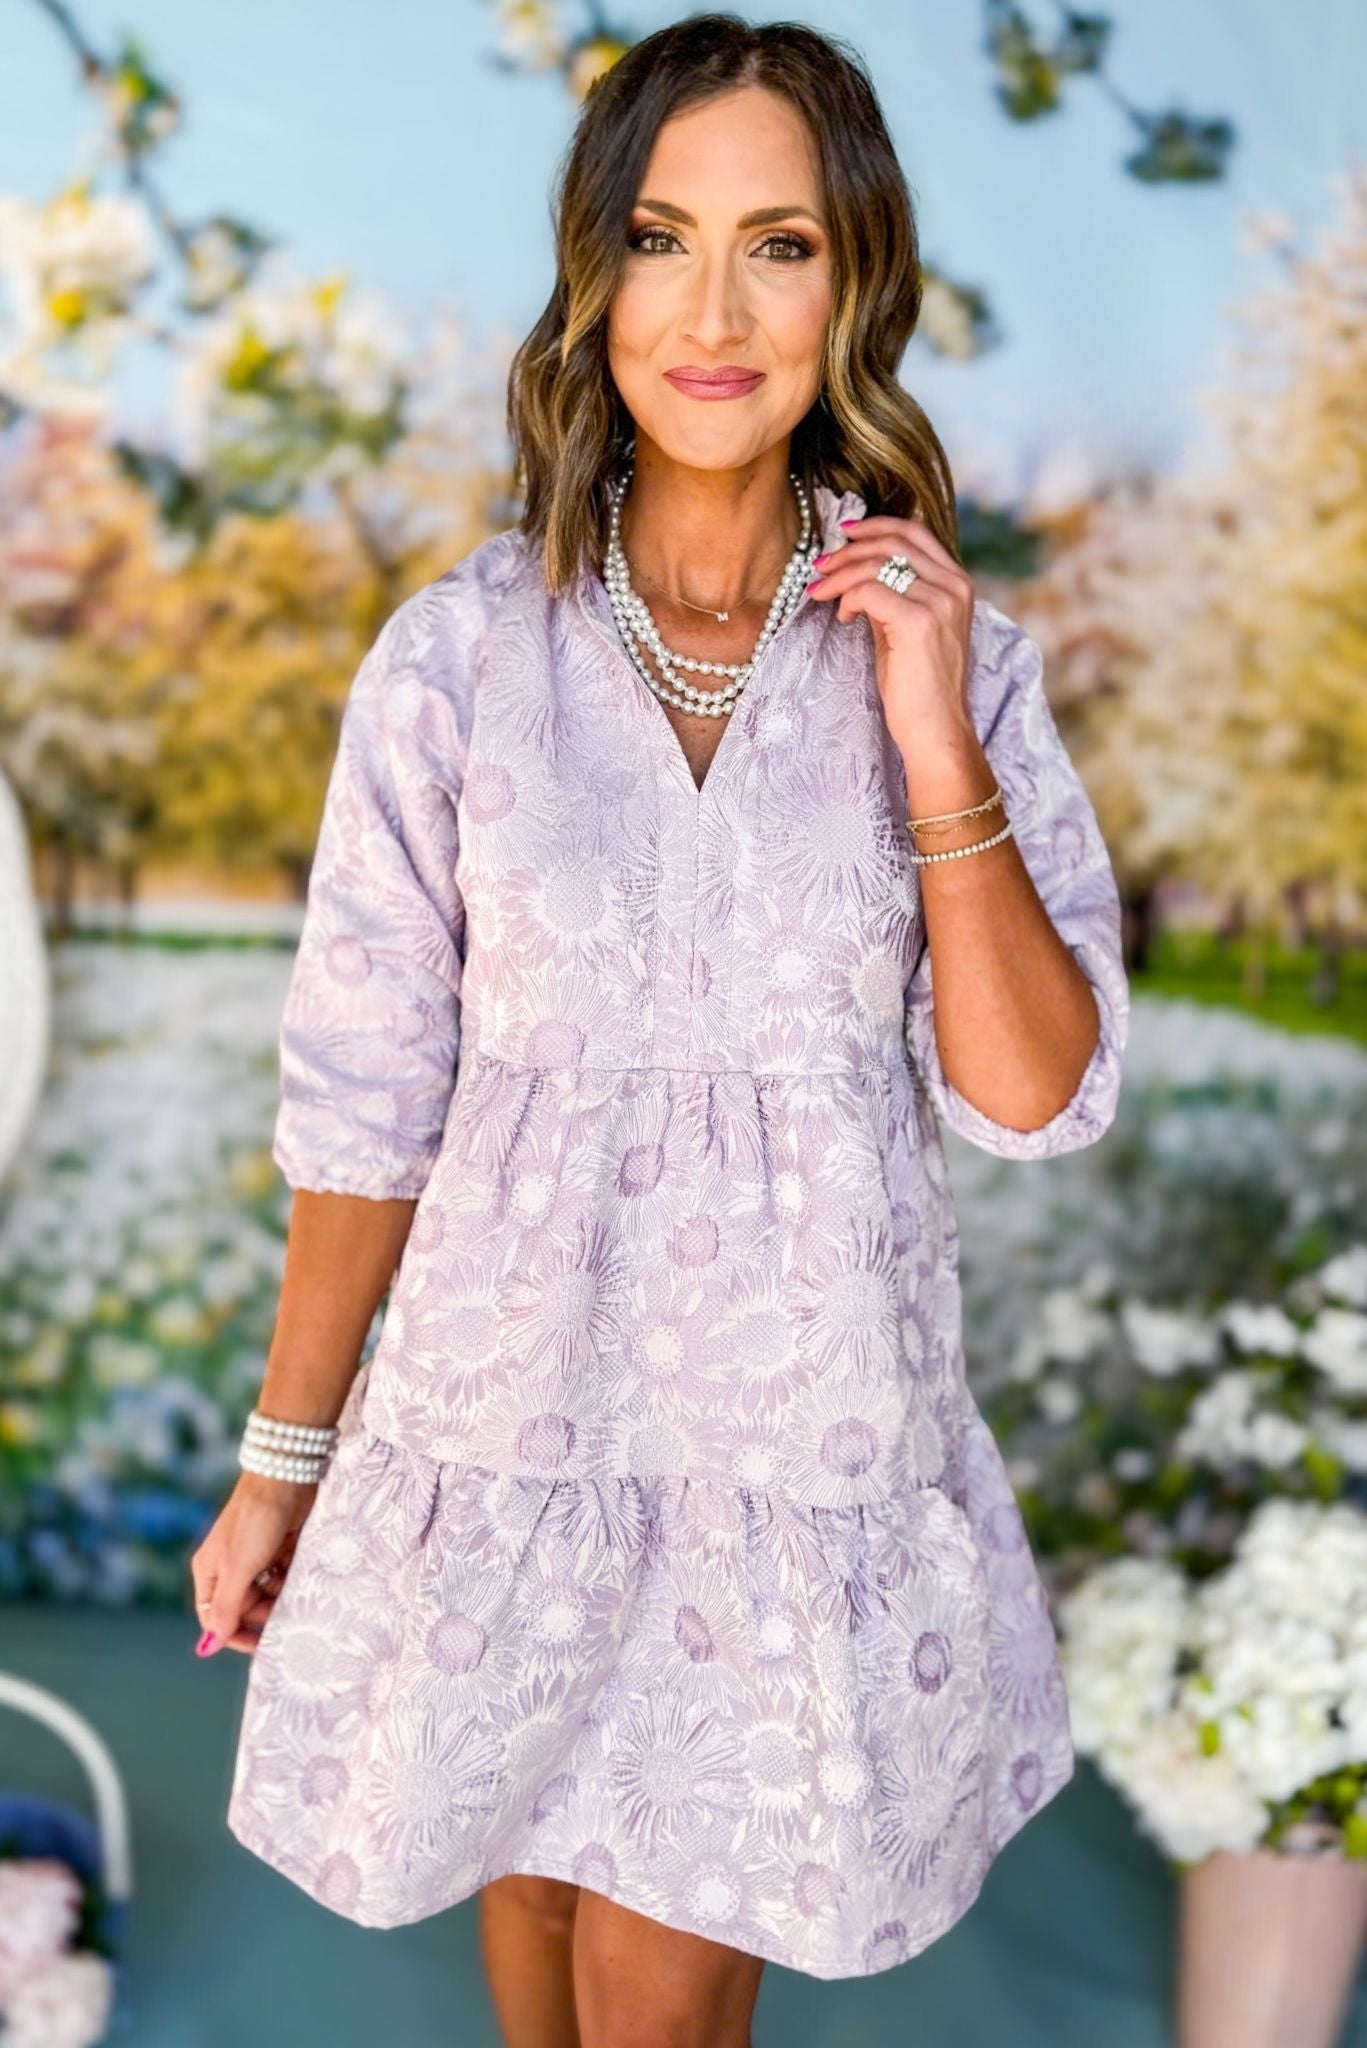 SSYS The Gloria 3/4 Sleeve Tiered Brocade Dress In Lavender, ssys the label, must have dress, brocade dress, easter dress, must have easter dress, spring fashion, mom style, brunch style, church style, shop style your senses by mallory fitzsimmons, ssys by mallory fitzsimmons